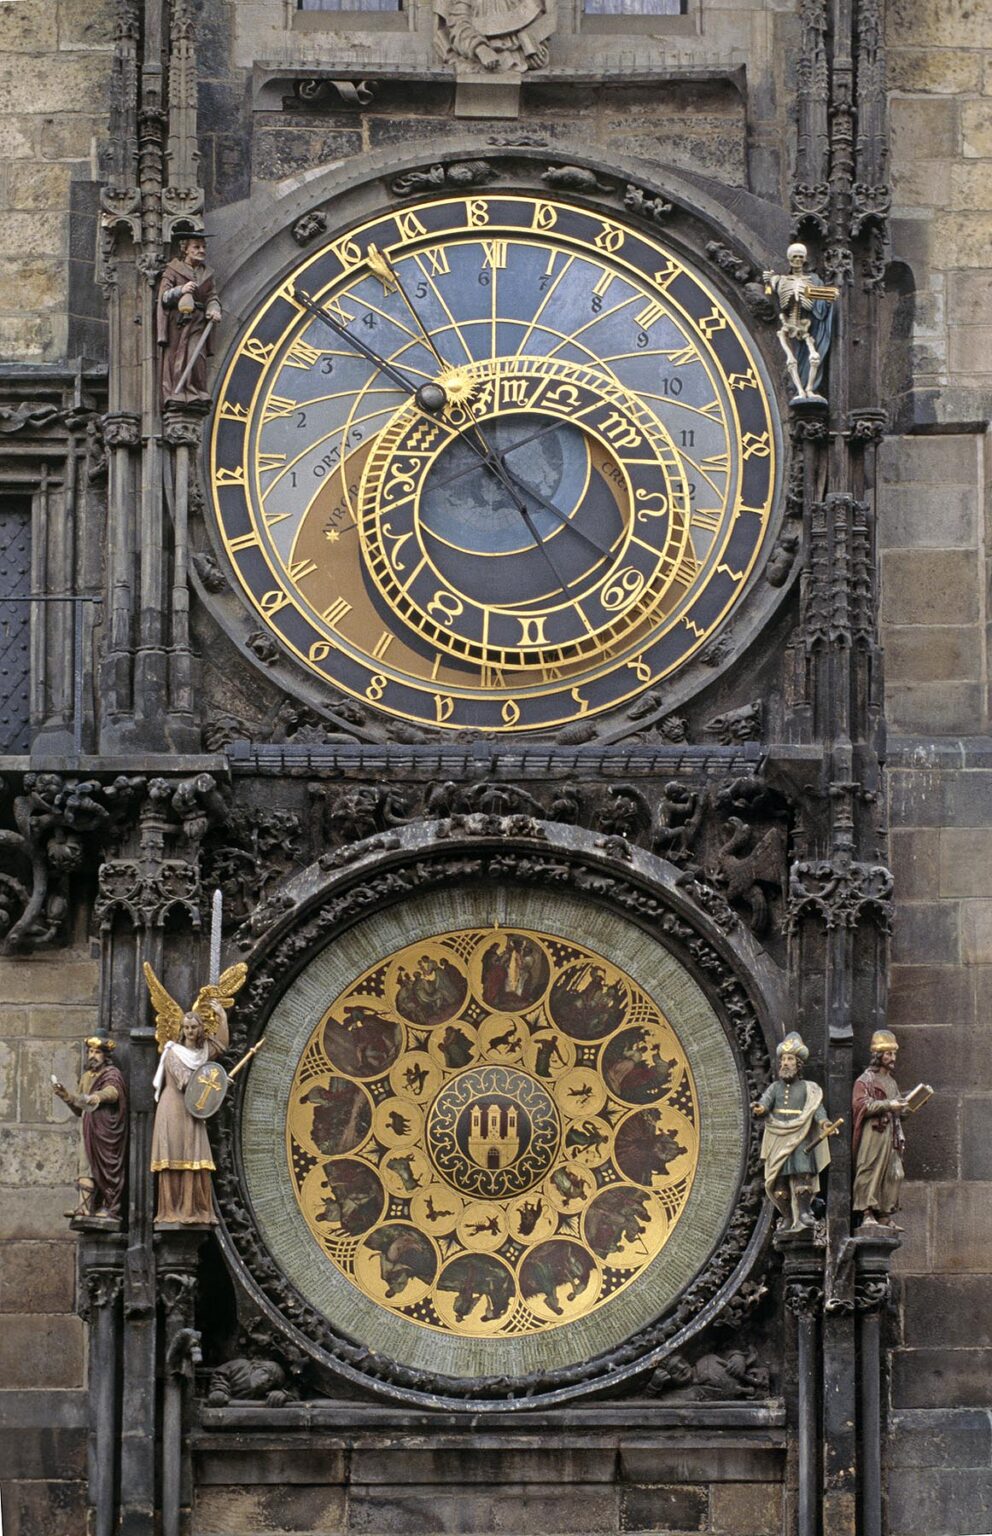 The GOTHIC ASTRONOMICAL CLOCK (1410) at OLD TOWN HALL in the historic city of PRAGUE (PRAHA) - CZECH REPUBLIC